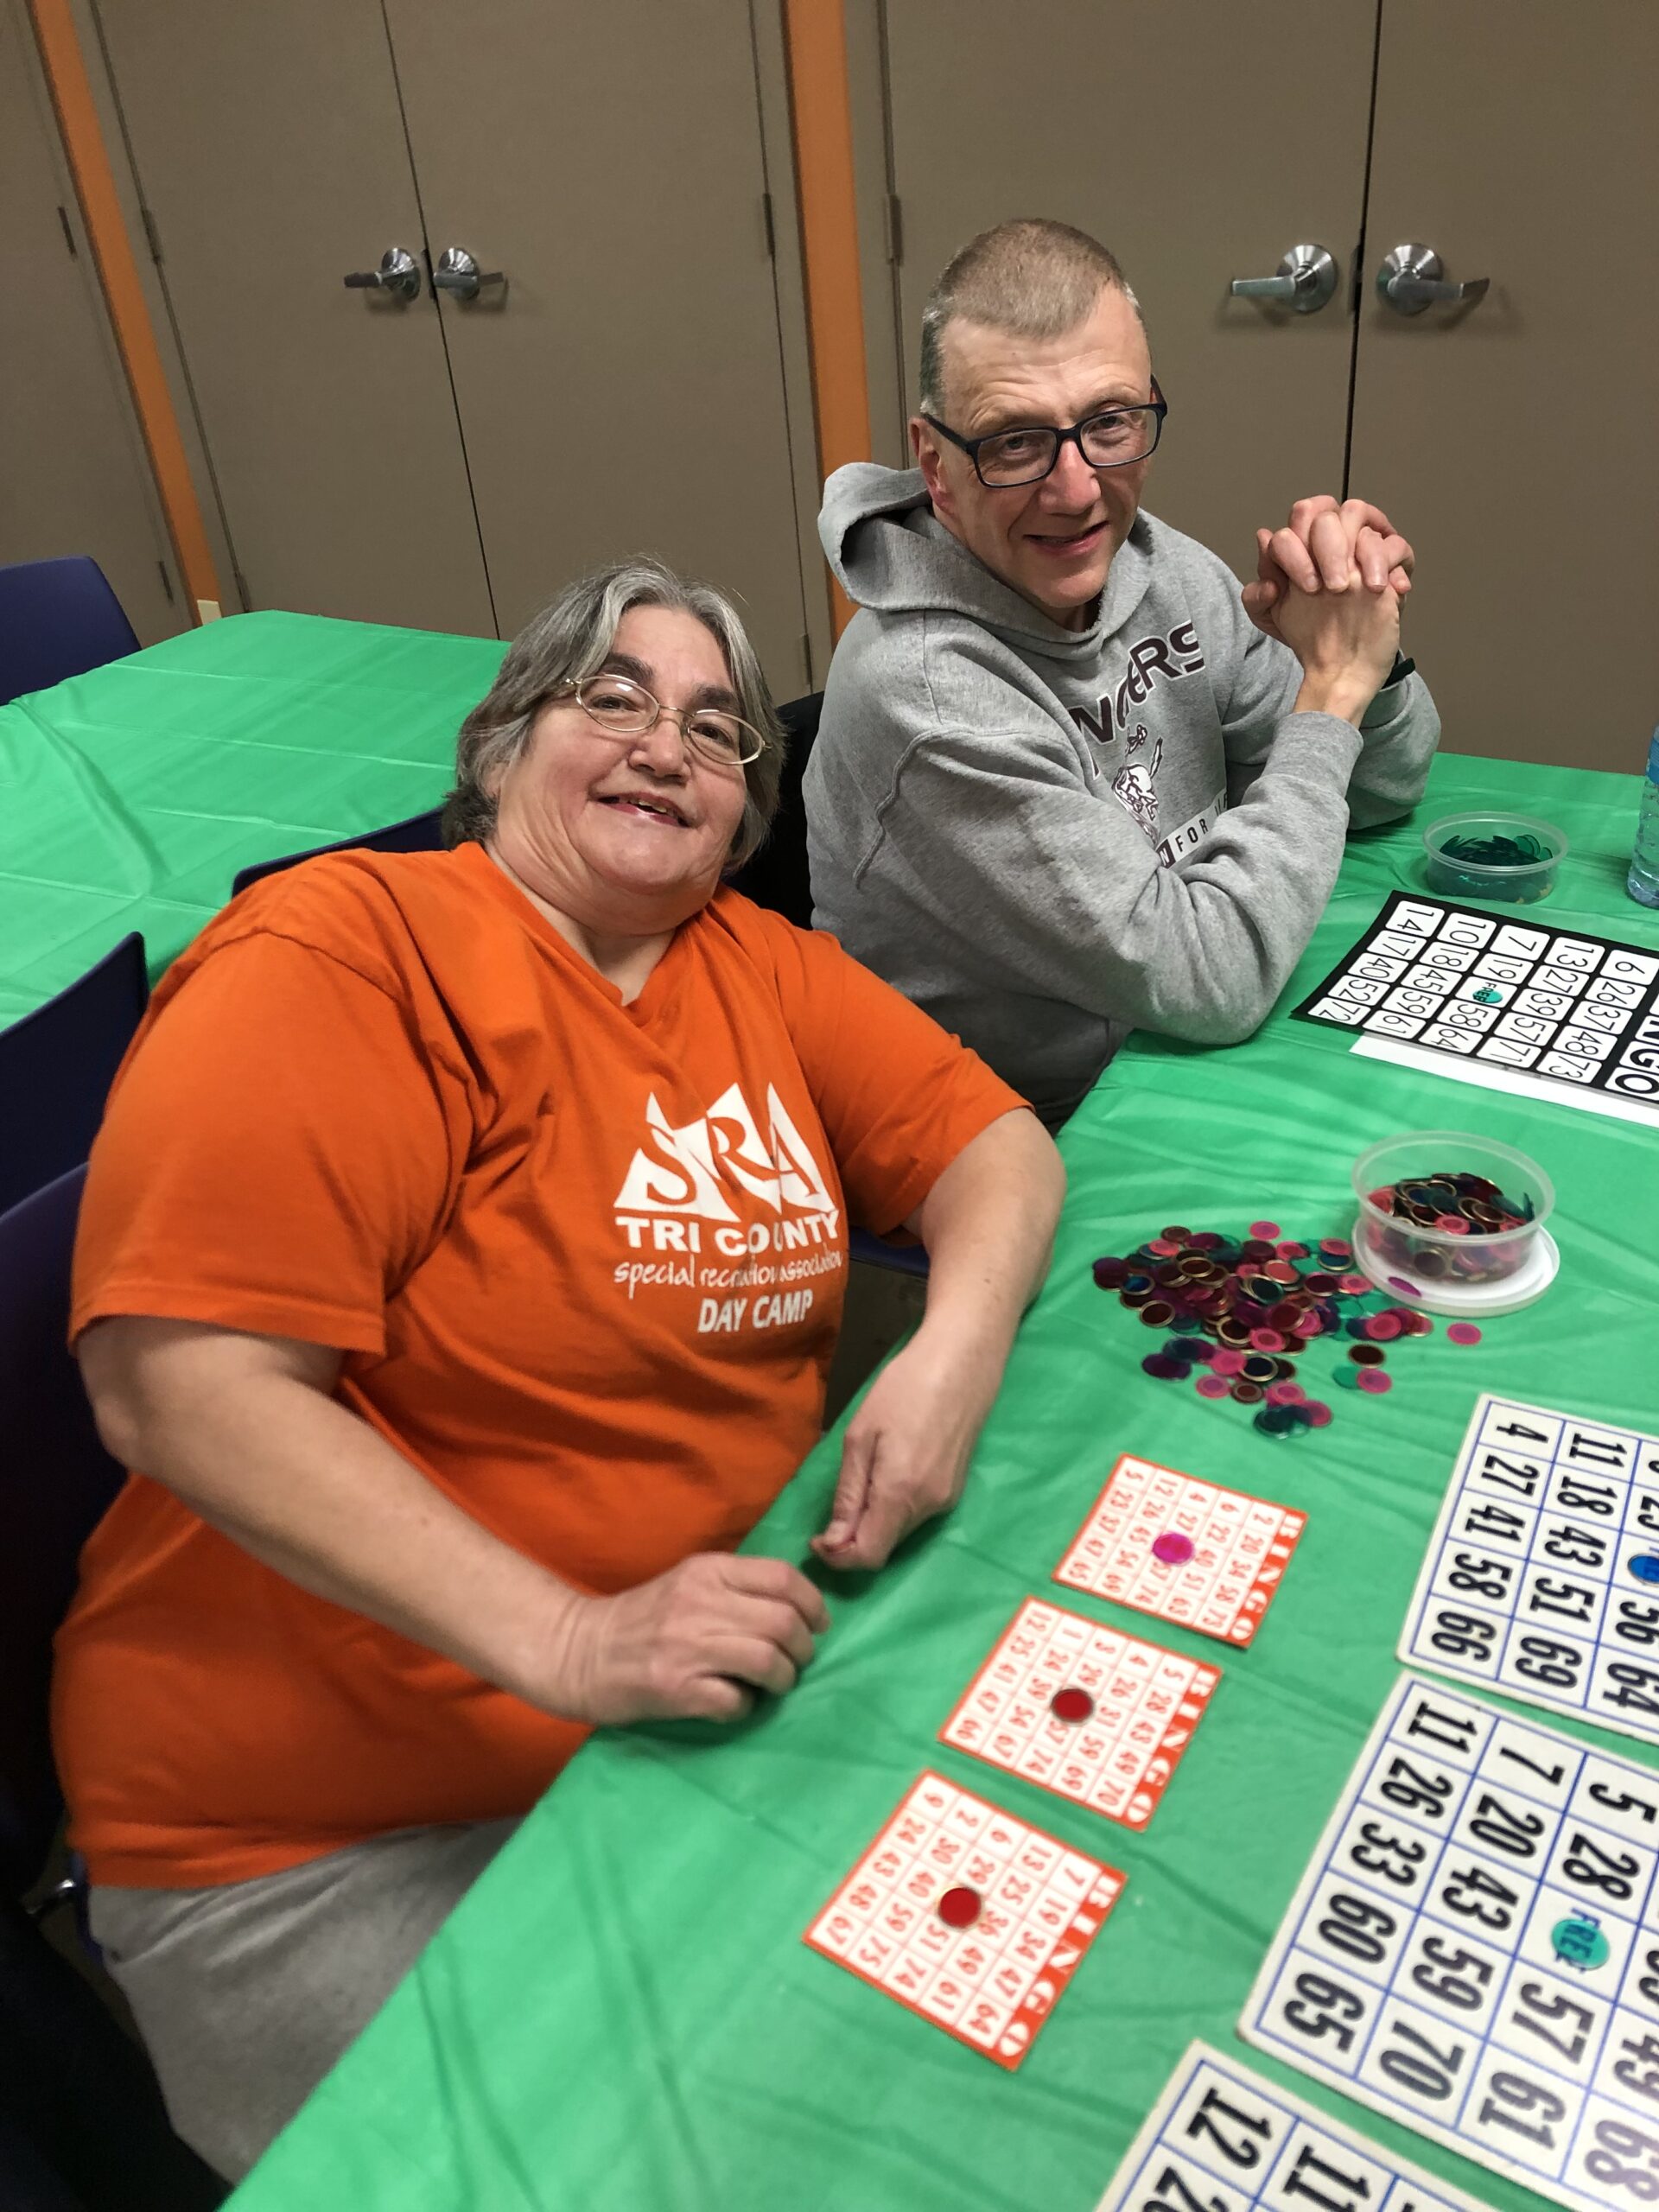 2 adults smile and pose for the picture while playing Bingo. There is a few Bingo cards and a big bowl in front of them with several Bingo chips inside and on the table.